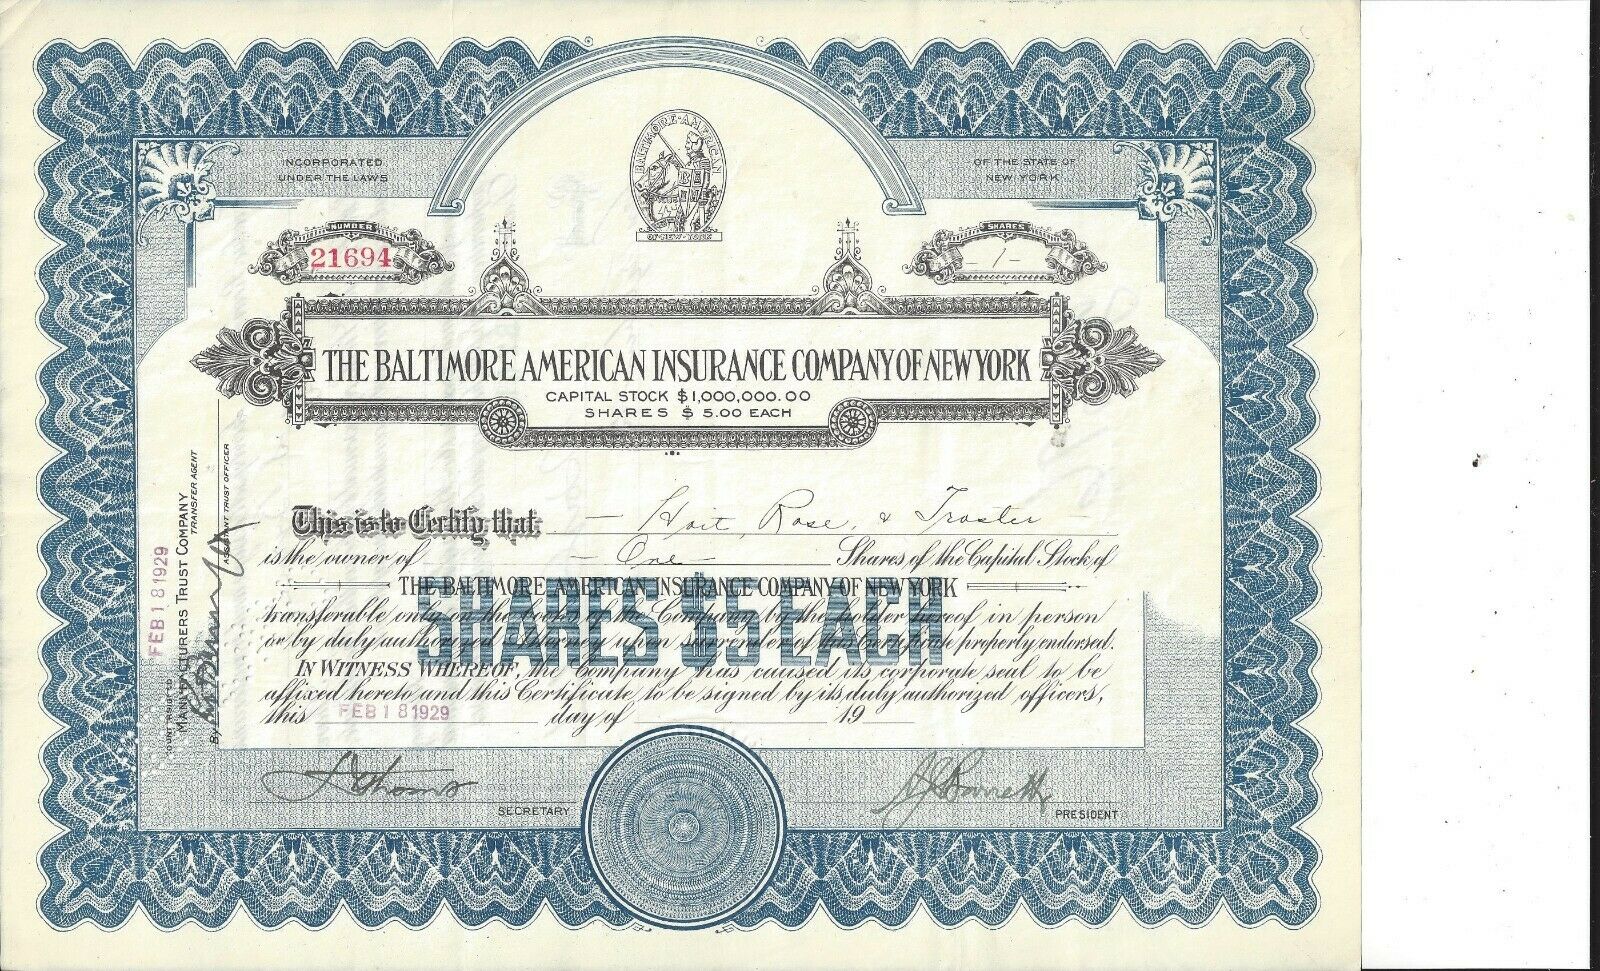 THE BALTIMORE AMERICAN INSURANCE COMPANY OF NEW YORK...1929 STOCK CERTIFICATE